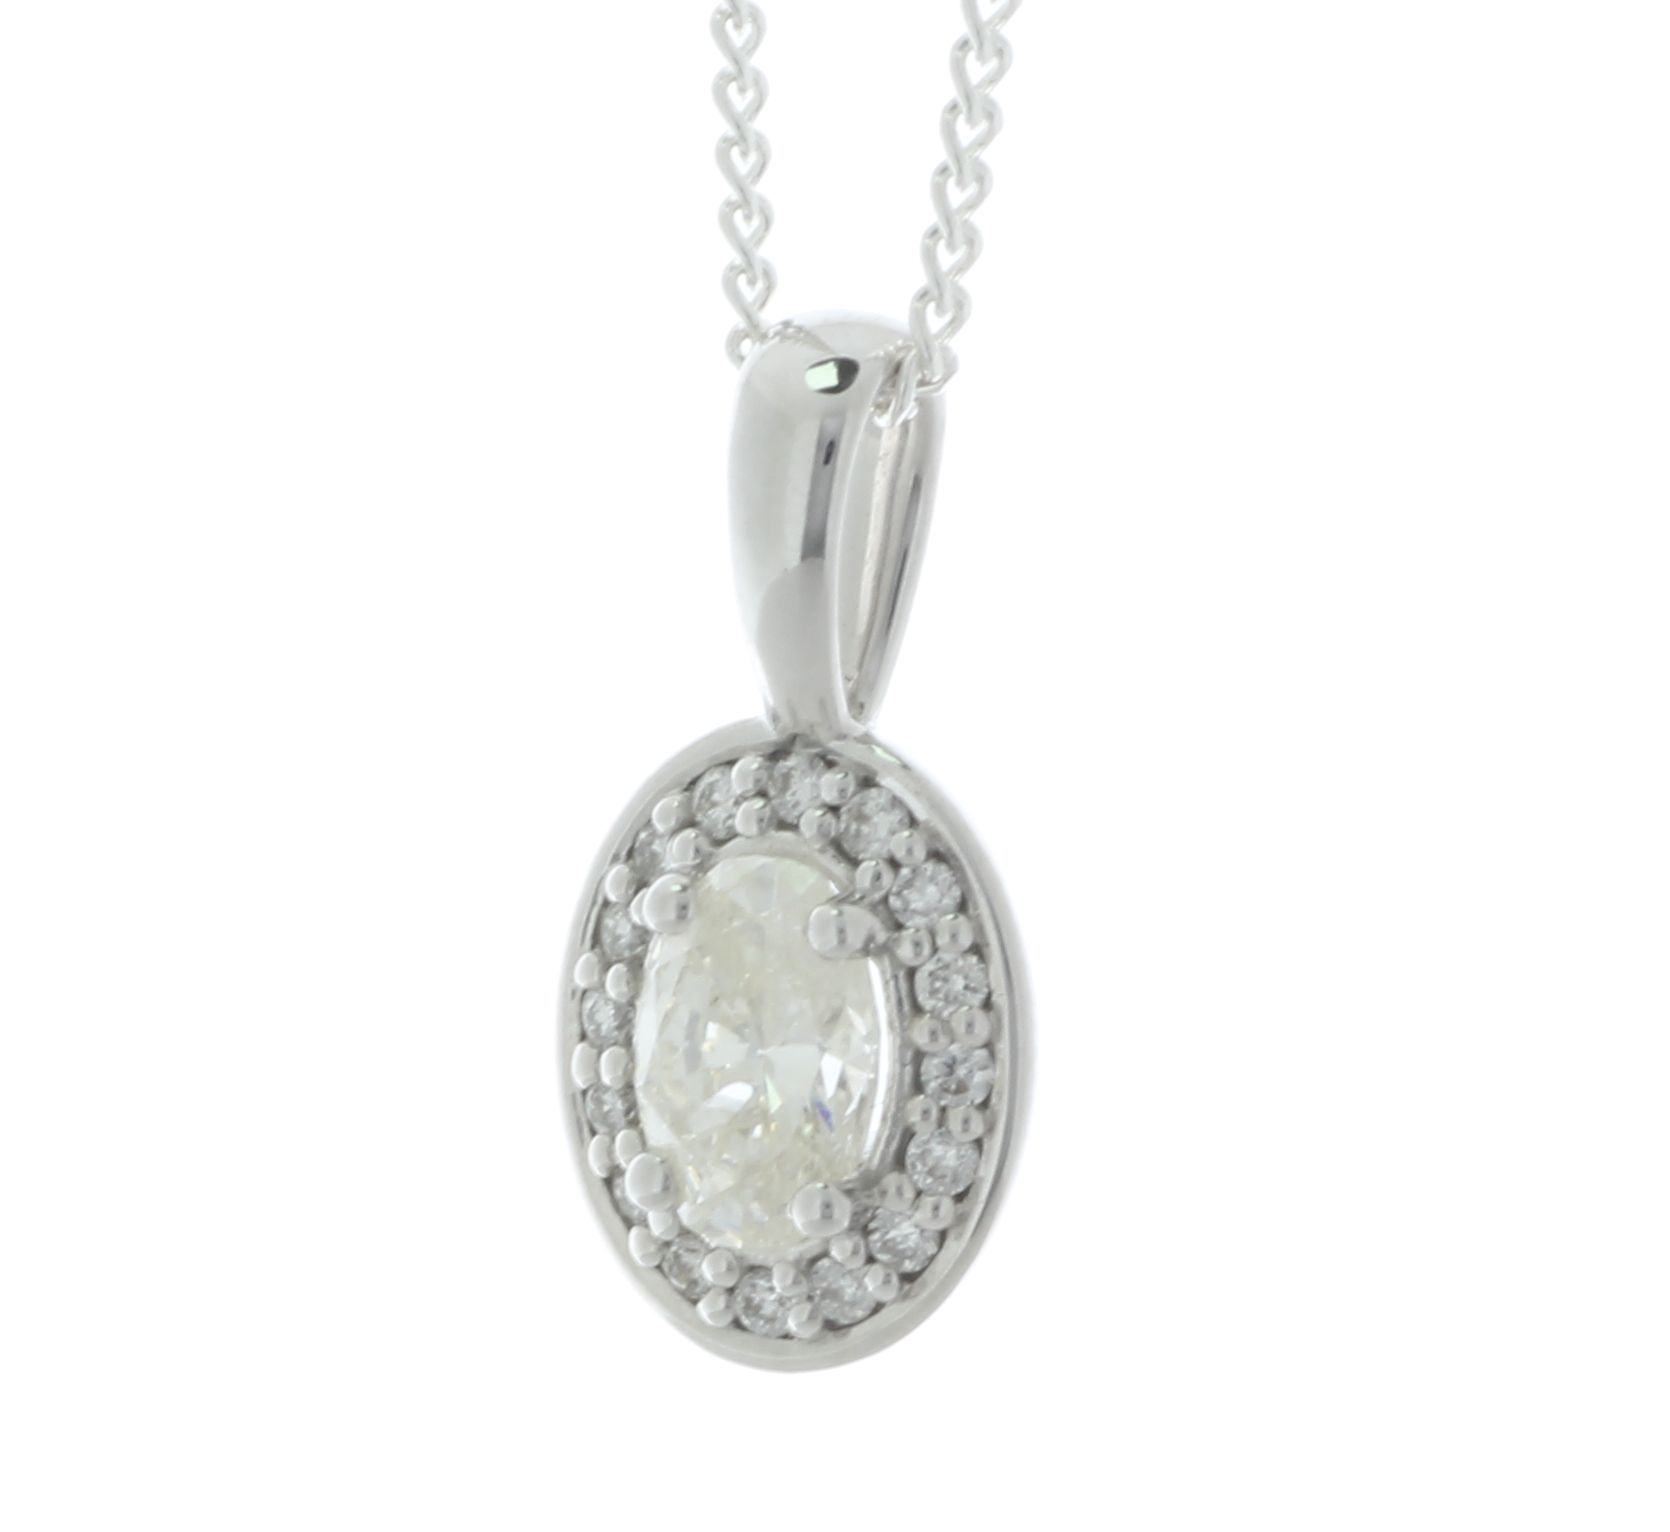 18ct White Gold Single Stone With Halo Setting Pendant (0.42) 0.51 Carats - Valued By IDI £6,385. - Image 2 of 3